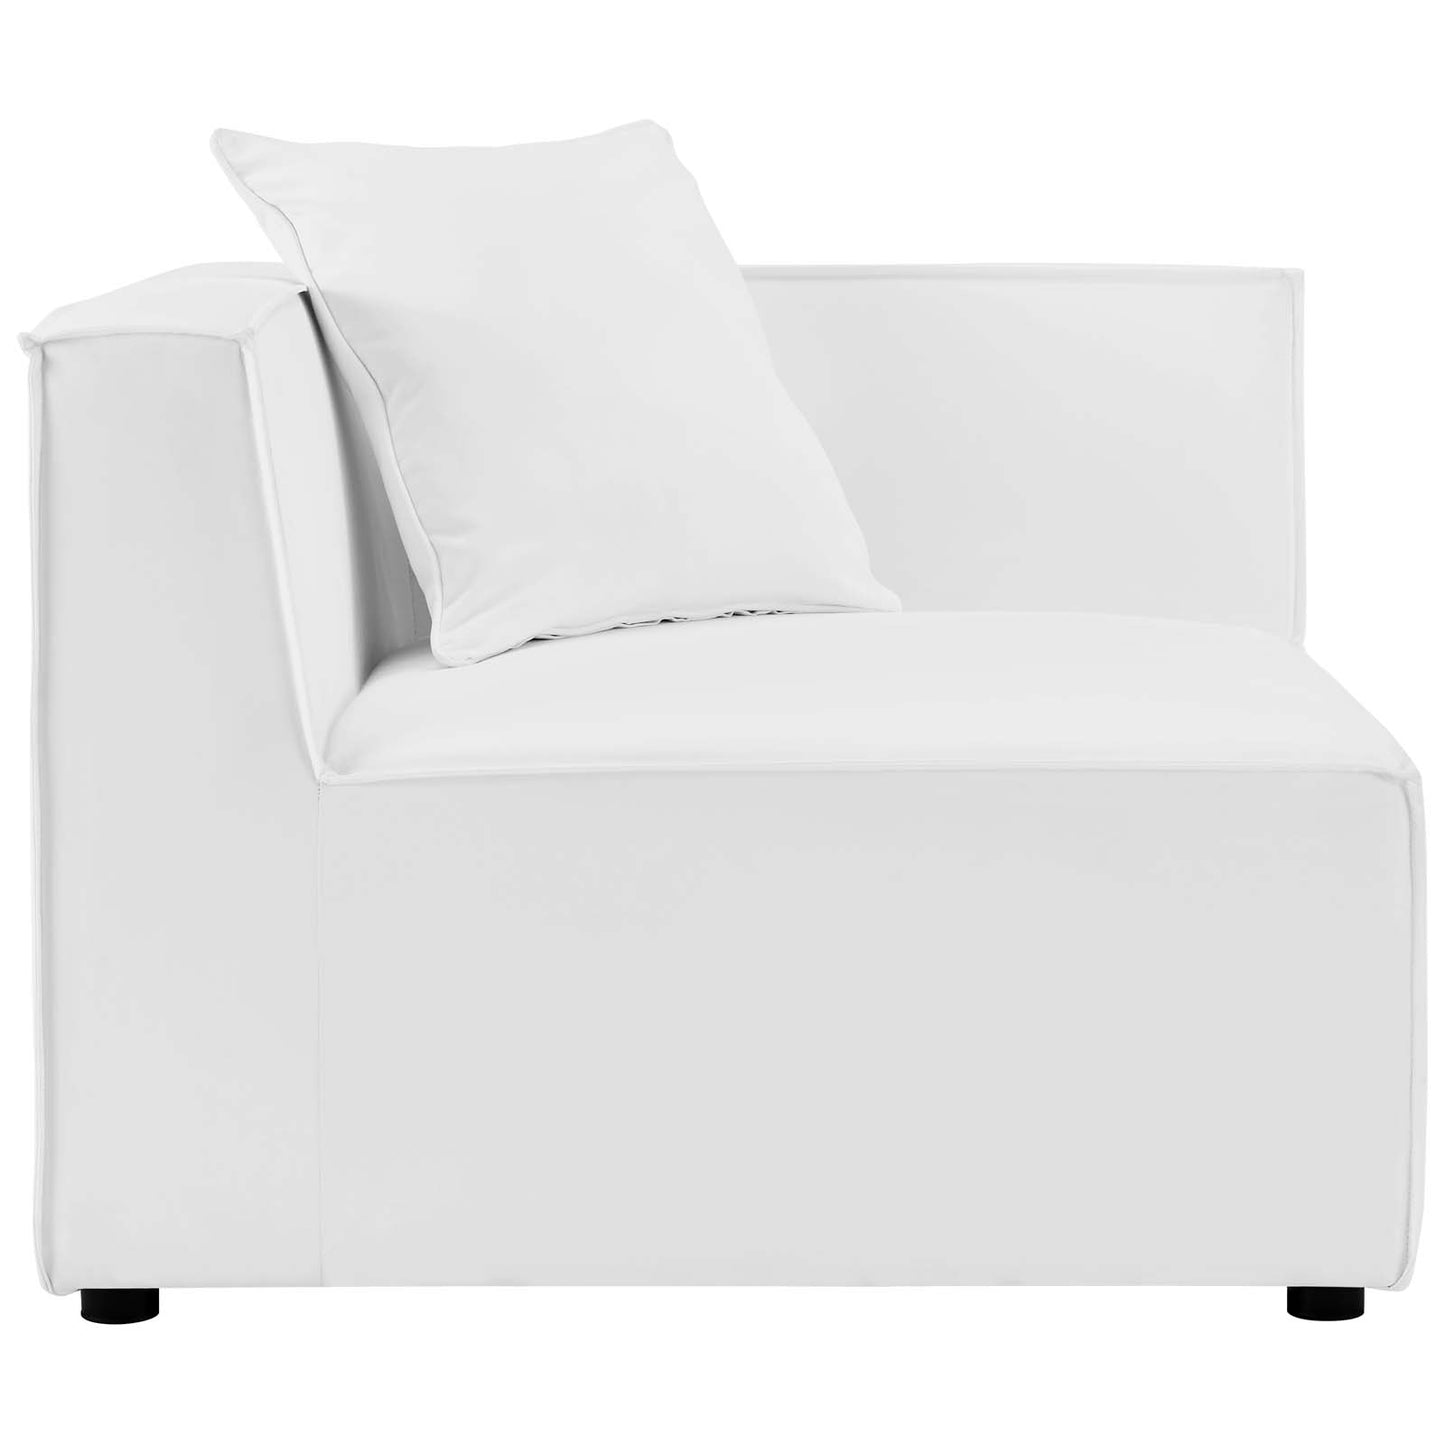 Saybrook Outdoor Patio Upholstered Loveseat and Ottoman Set White EEI-4378-WHI